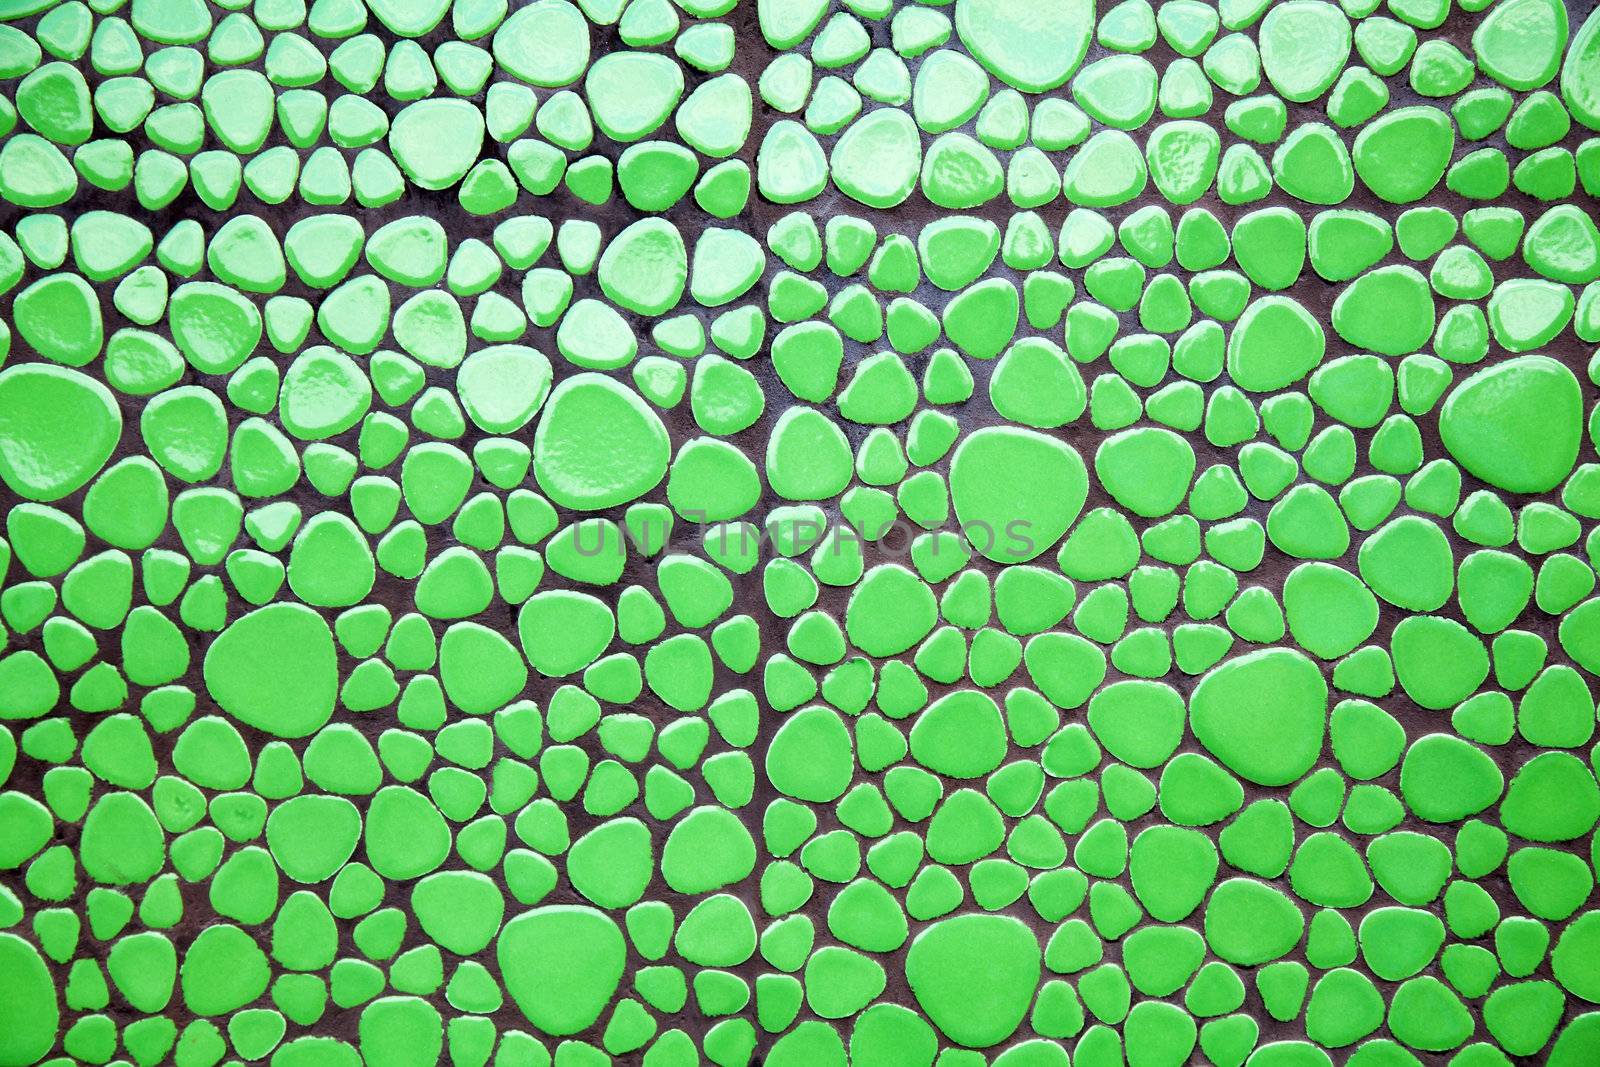 Green defferent shape mosaic tiles by RawGroup